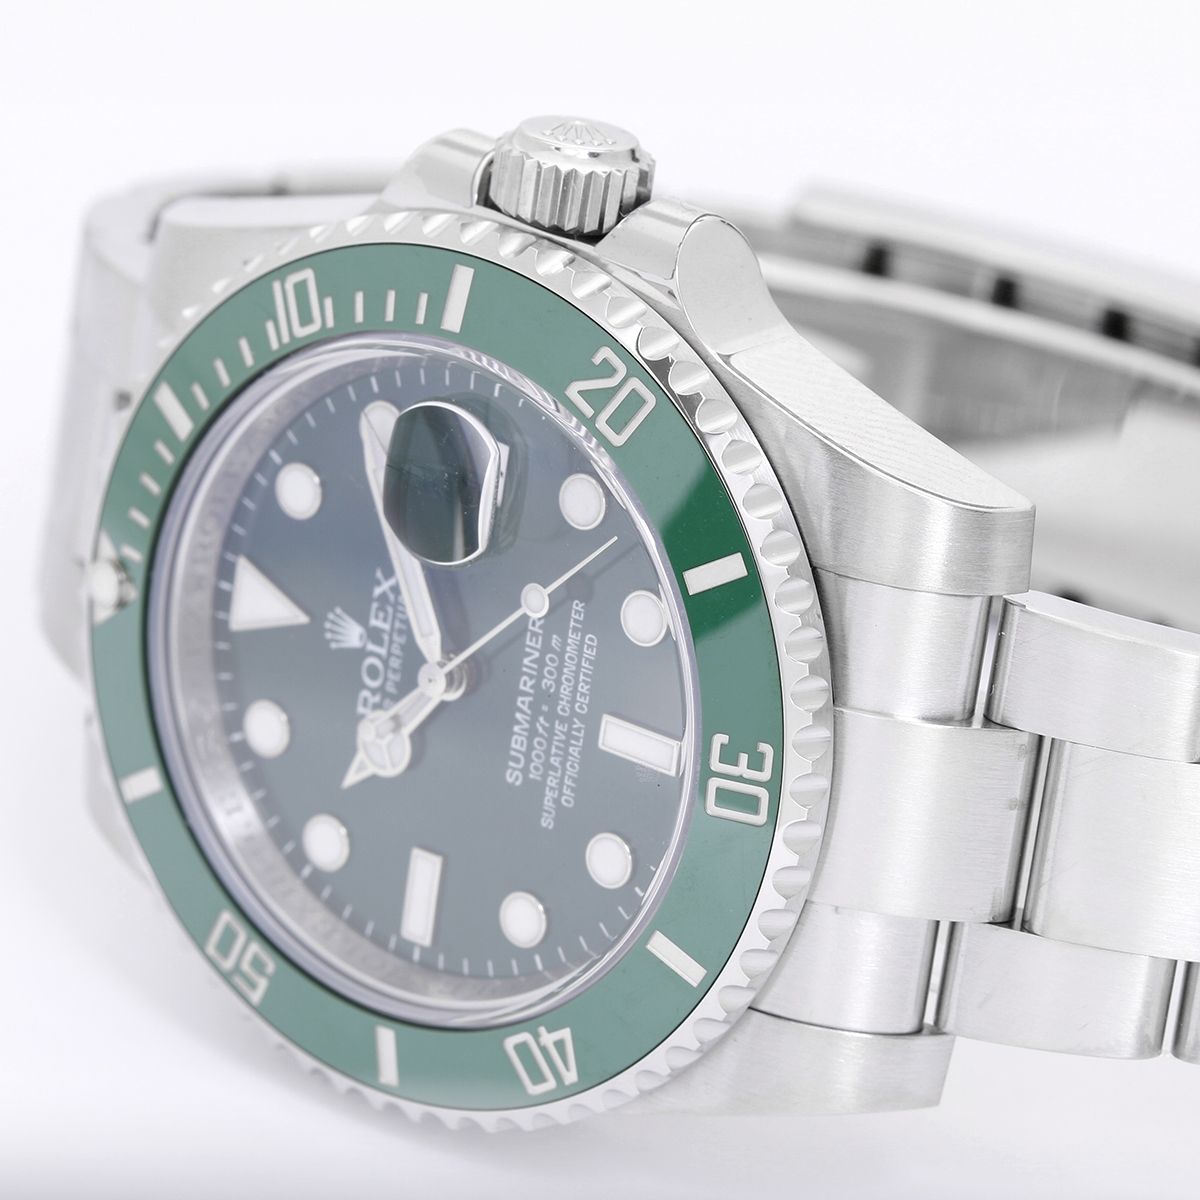 Rolex Submariner Hulk Green Dial Bezel Watch 116610LV For Sale at